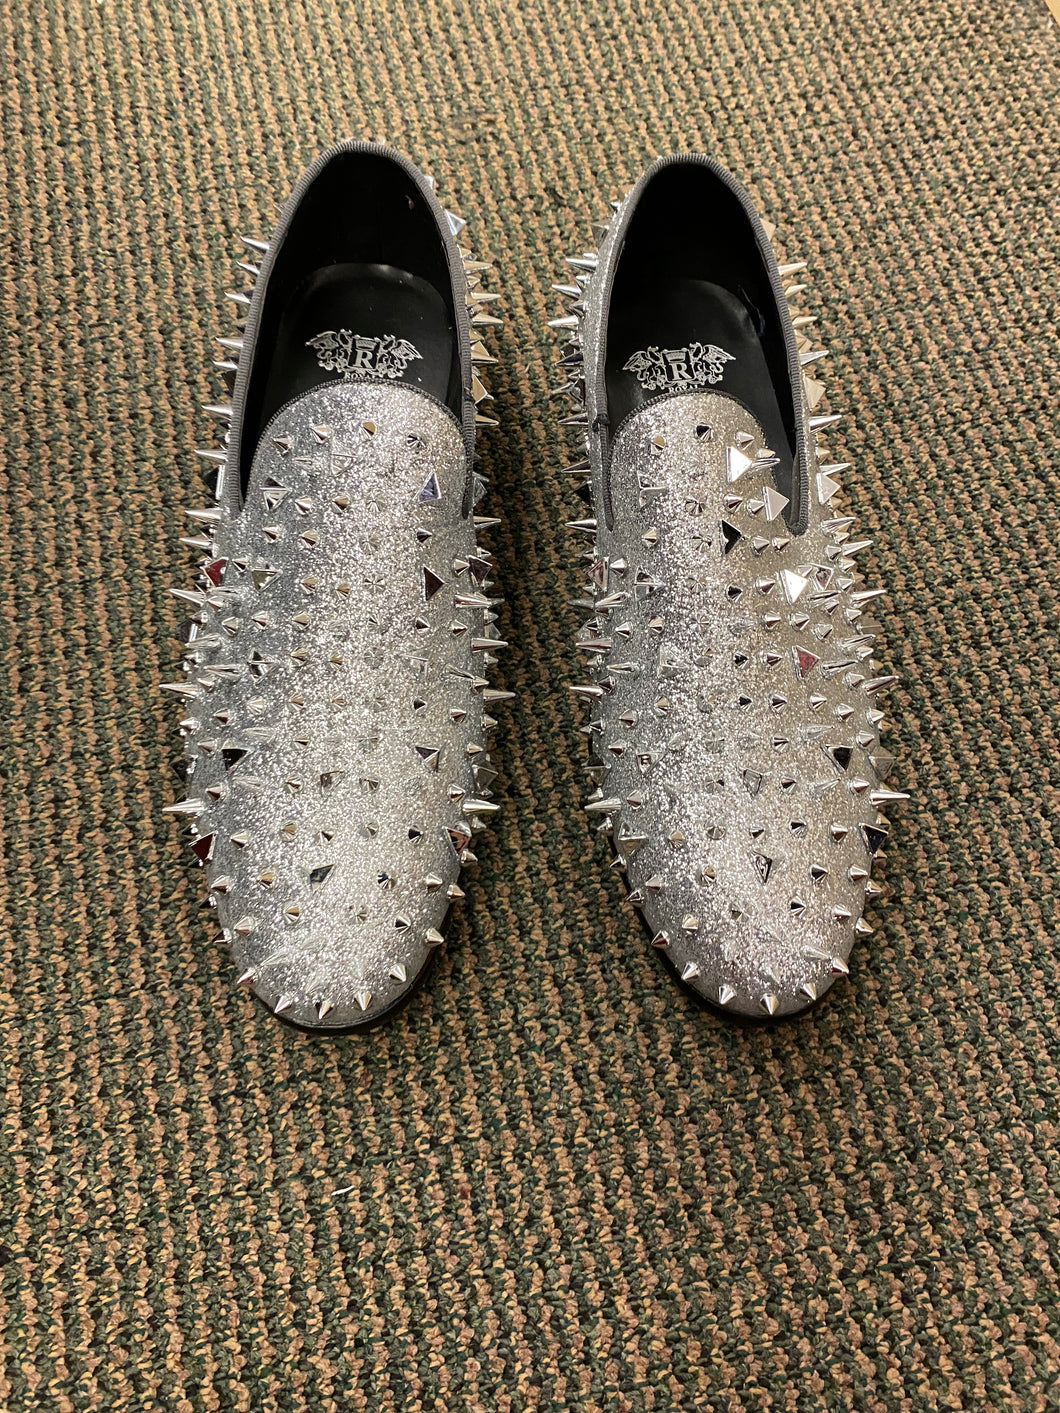 Royal Shoes Silver Spikes Red Bottoms Mens Smoking Slip-on Dress Prom – CC  Suits